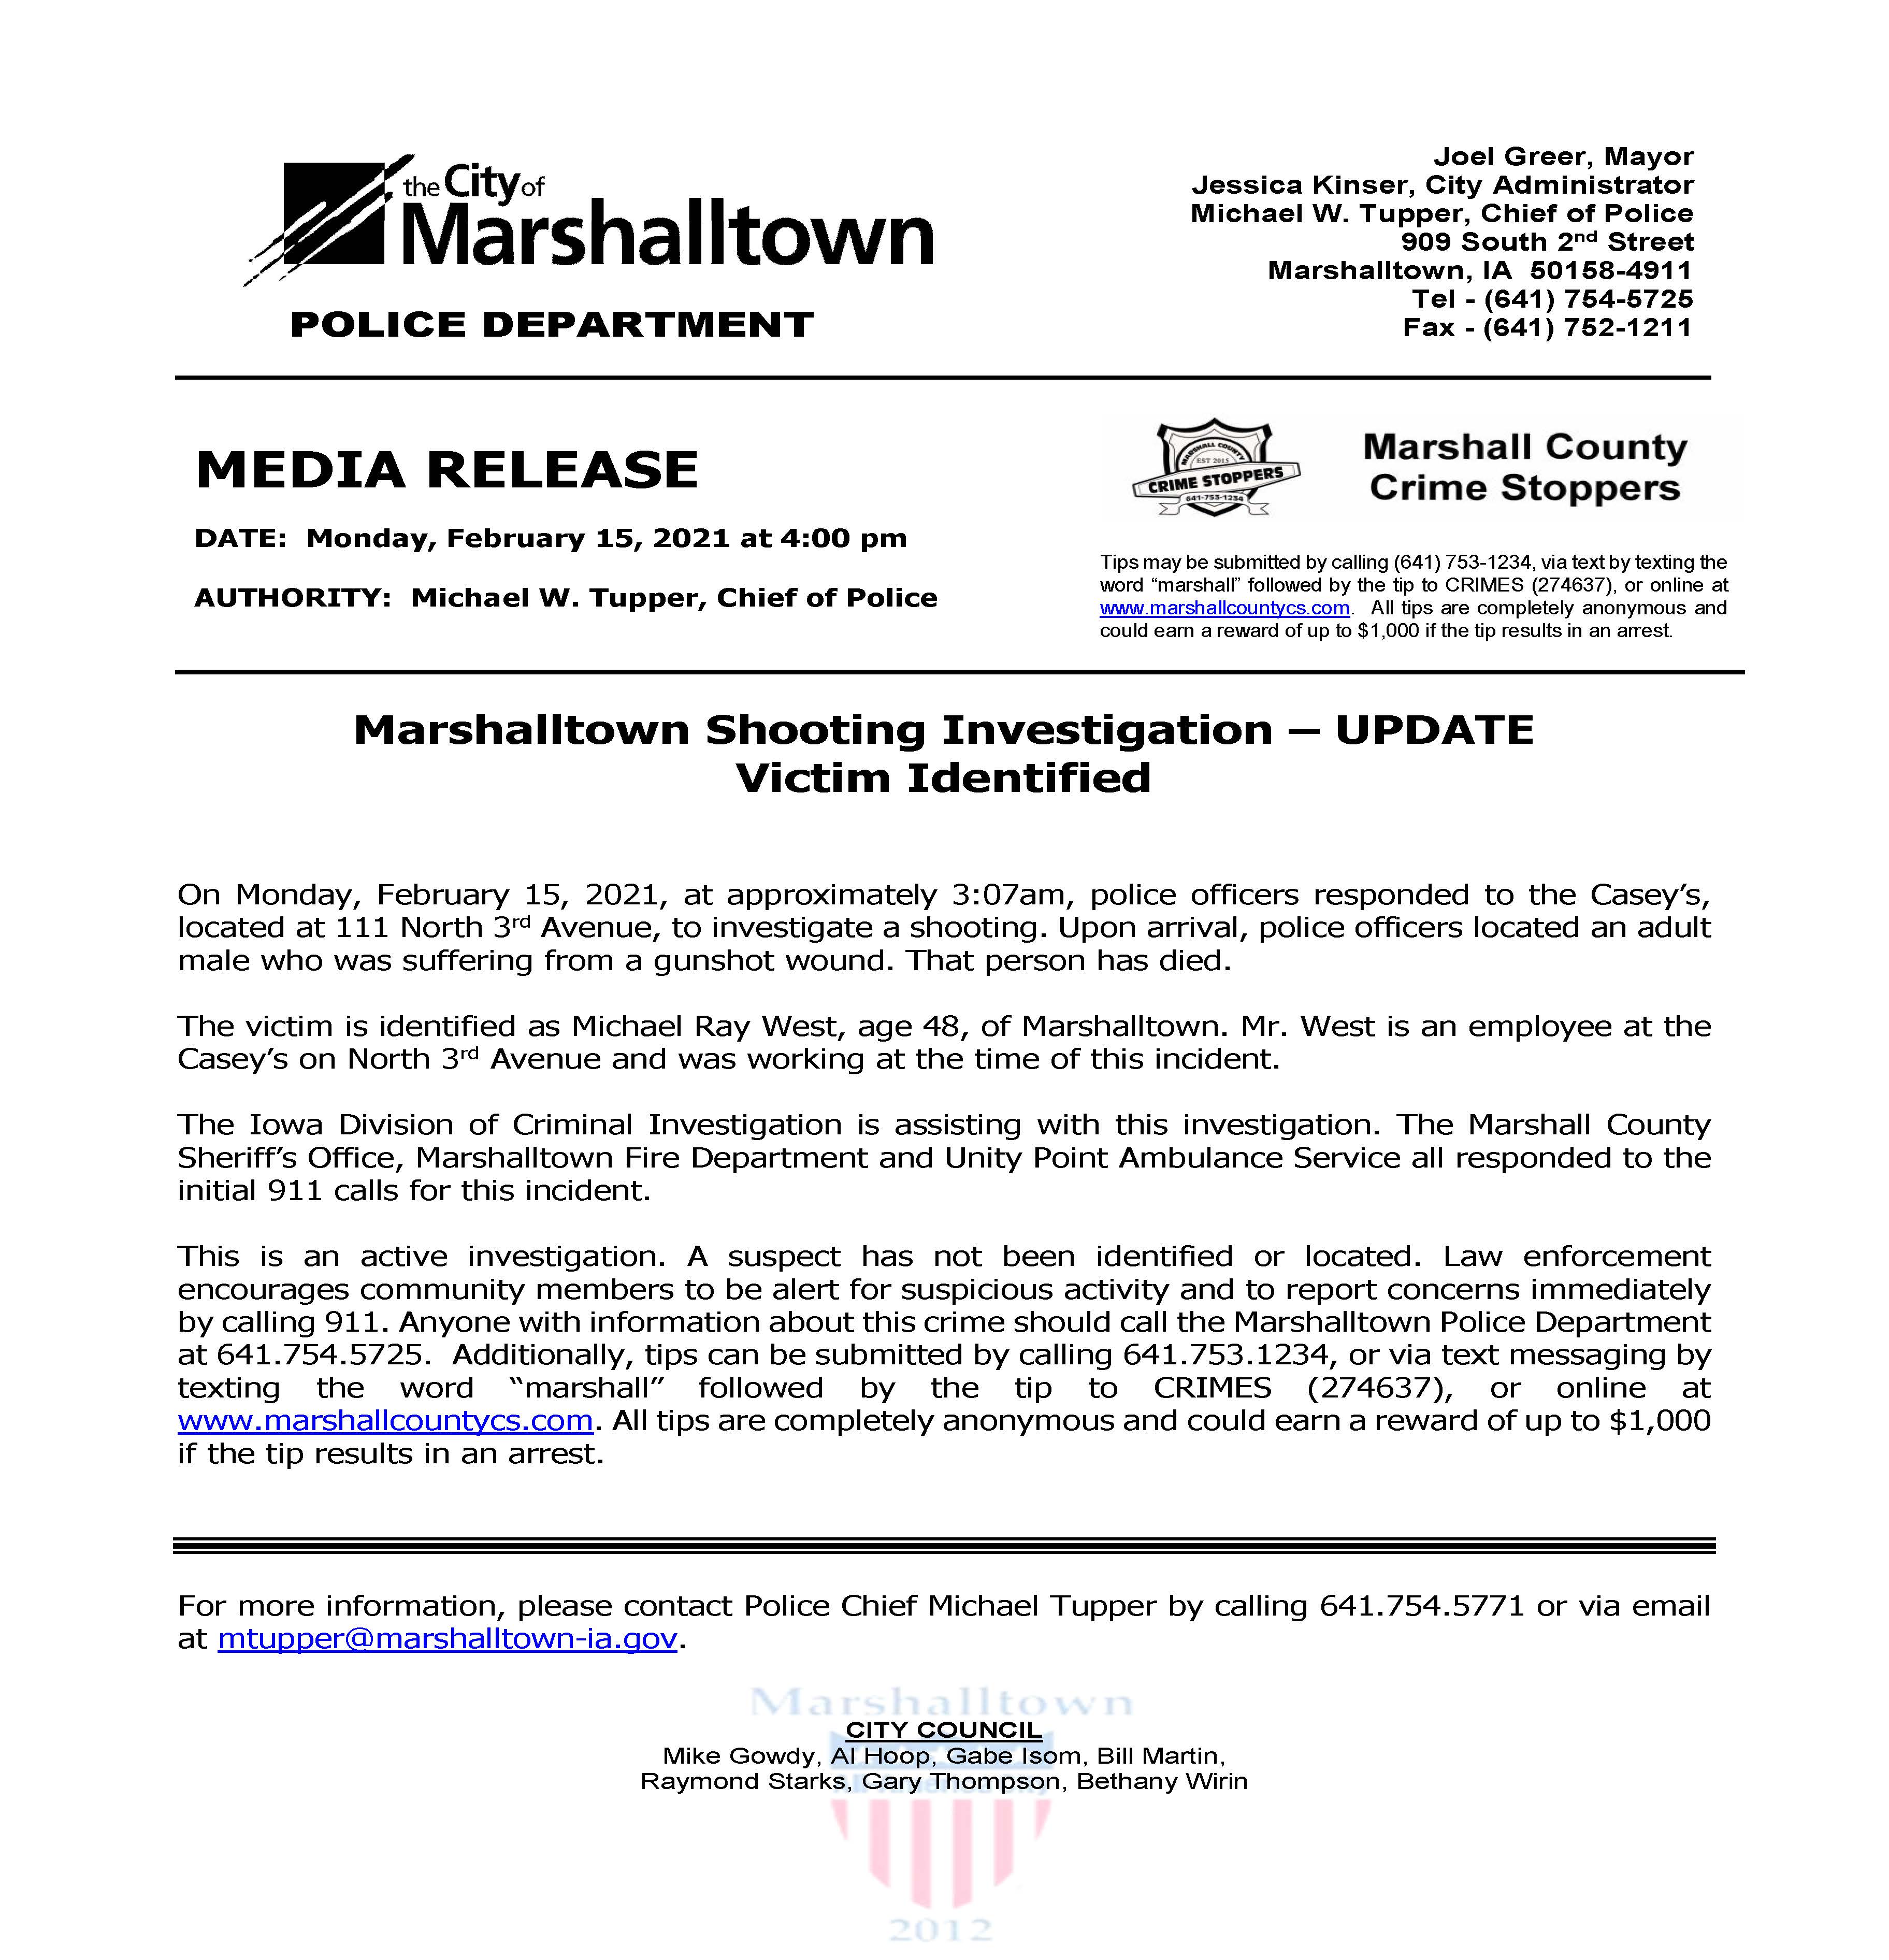 Link to Marshalltown PD press release